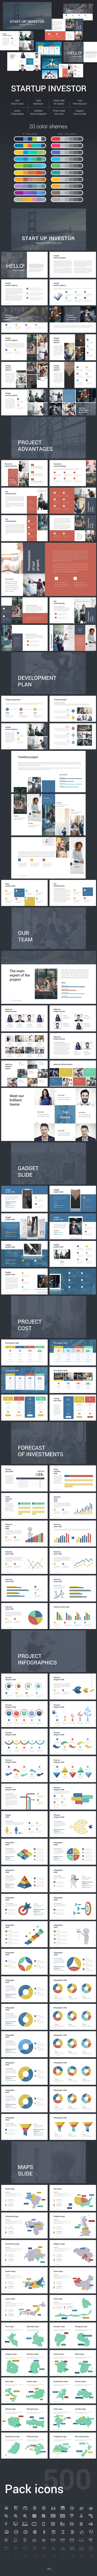 Startup Investor Pitch Deck PowerPoint Template